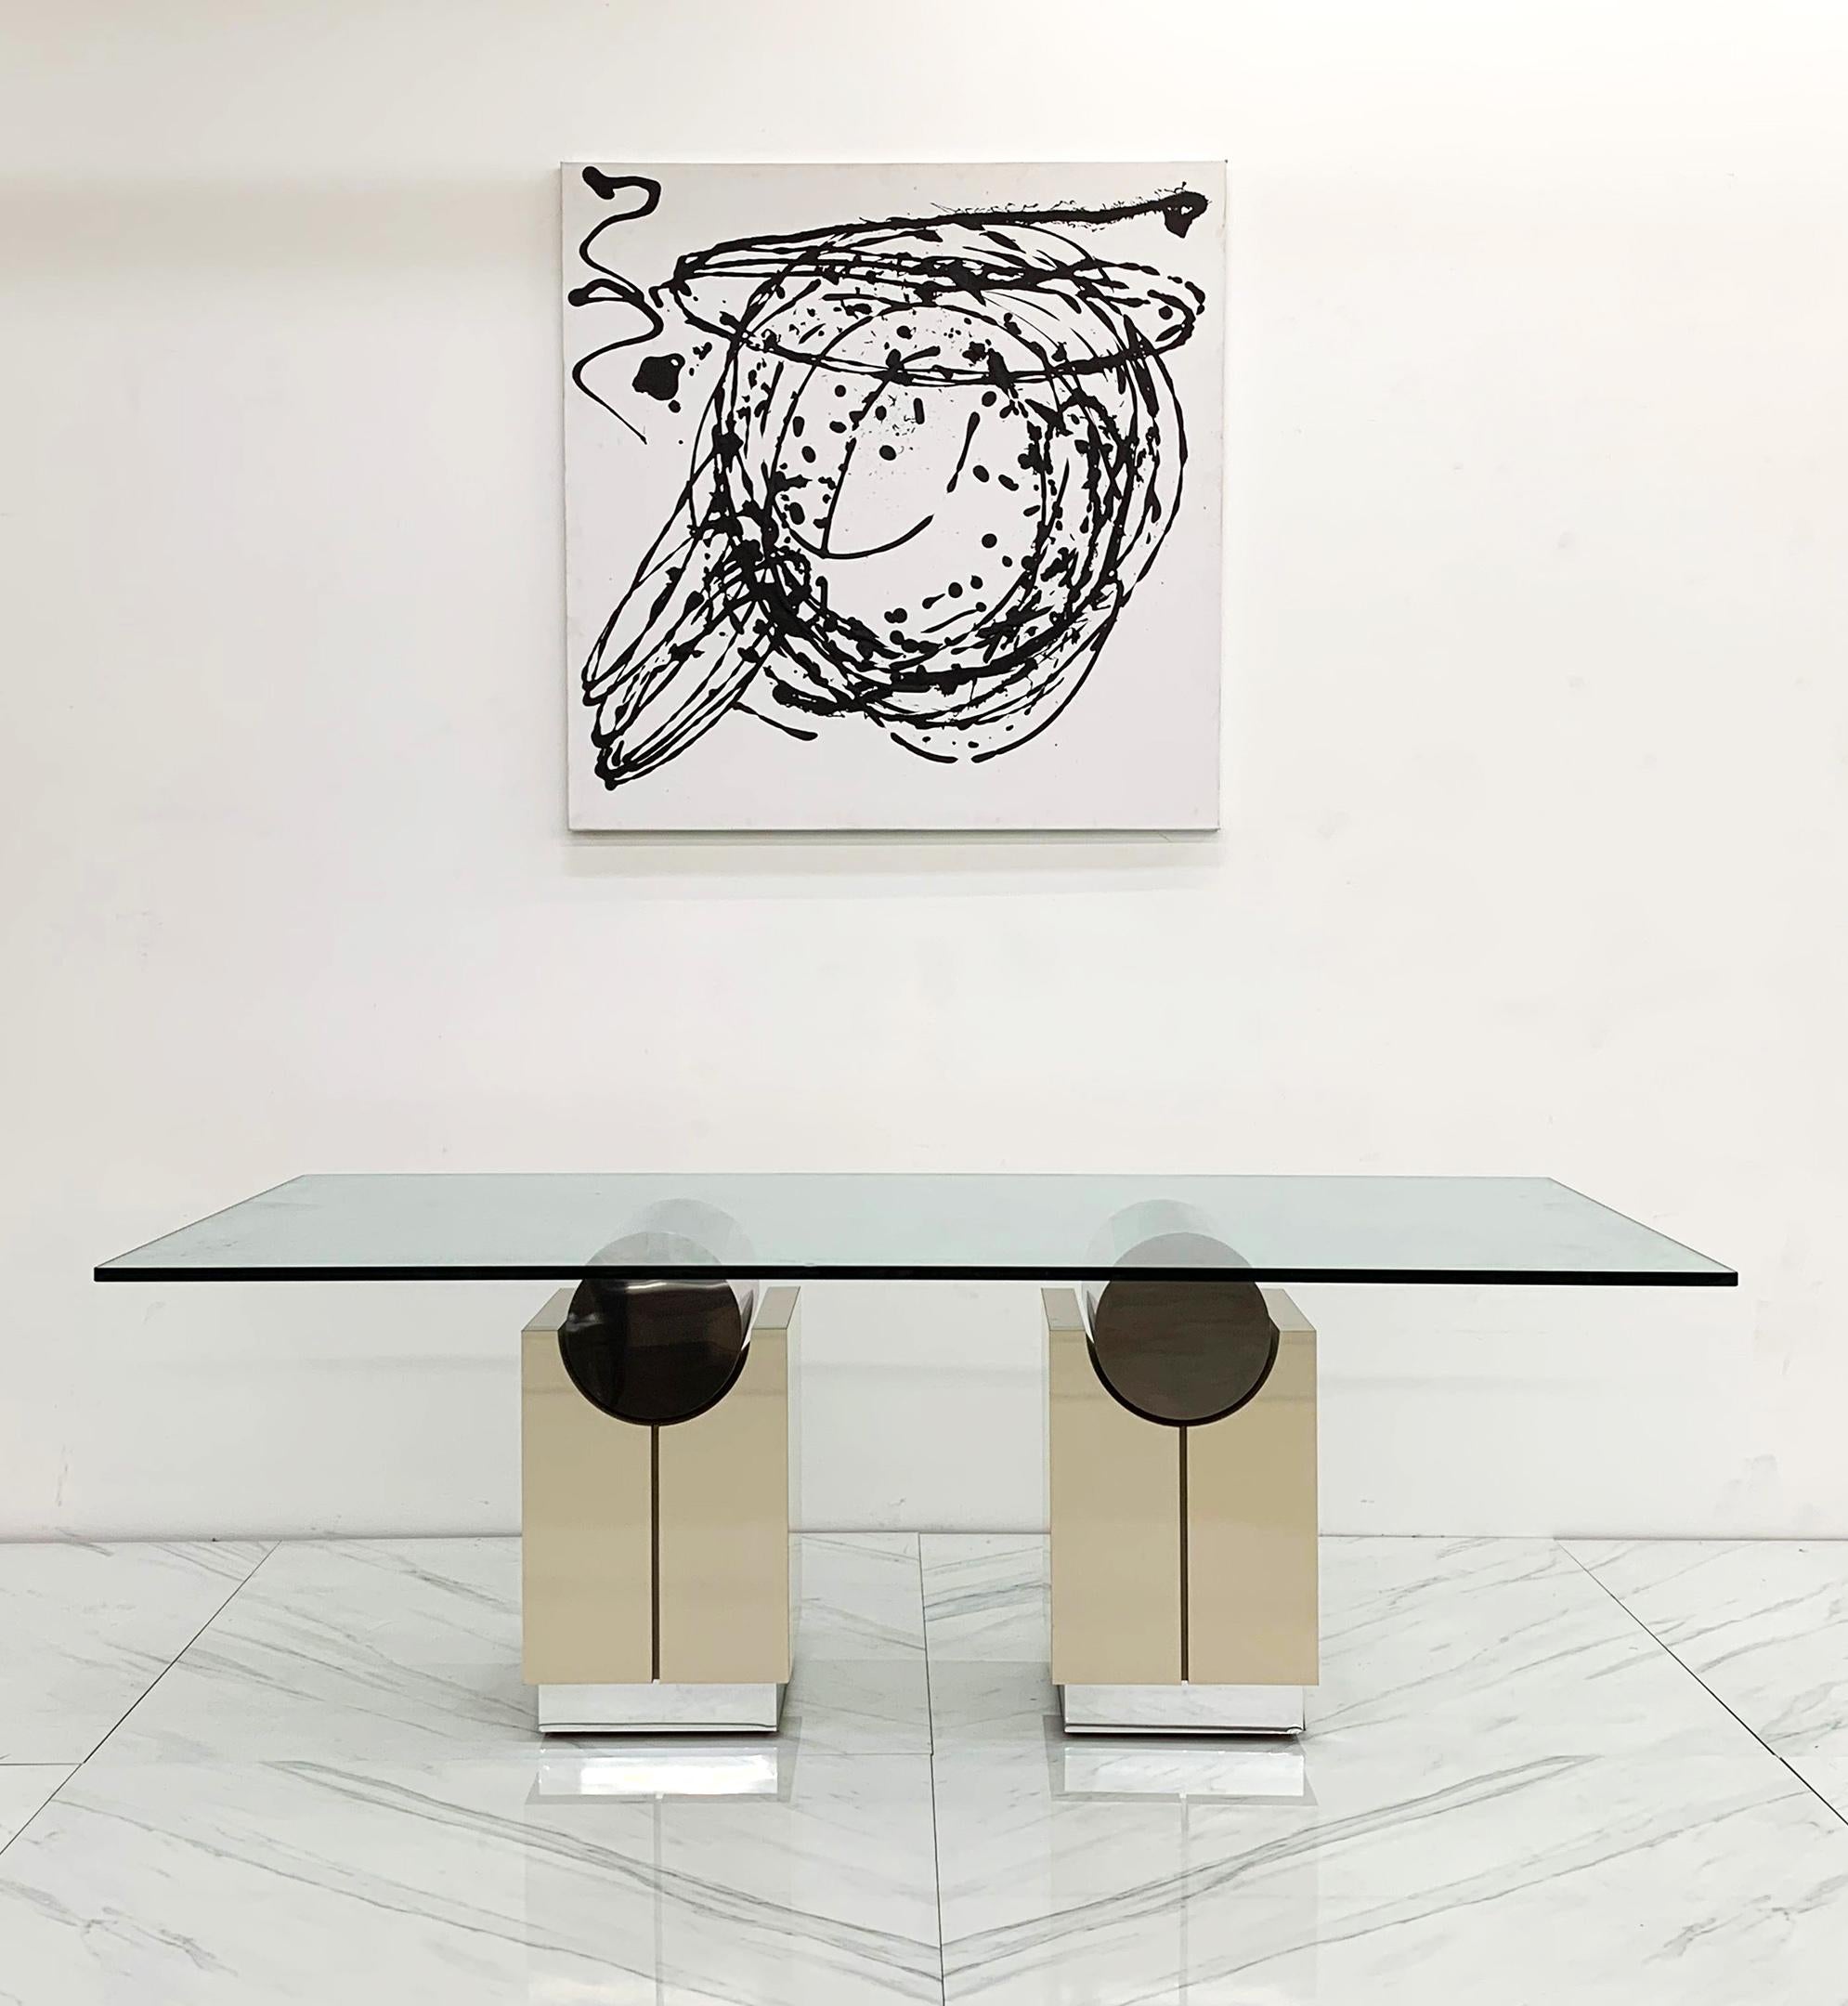 Available we have this absolutely gorgeous double pedestal dining table or writing table. These table bases feature a mirrored finish stainless cylinder shaped tops with a peach, or flesh-toned lacquered bases. This dining table makes a subtle post